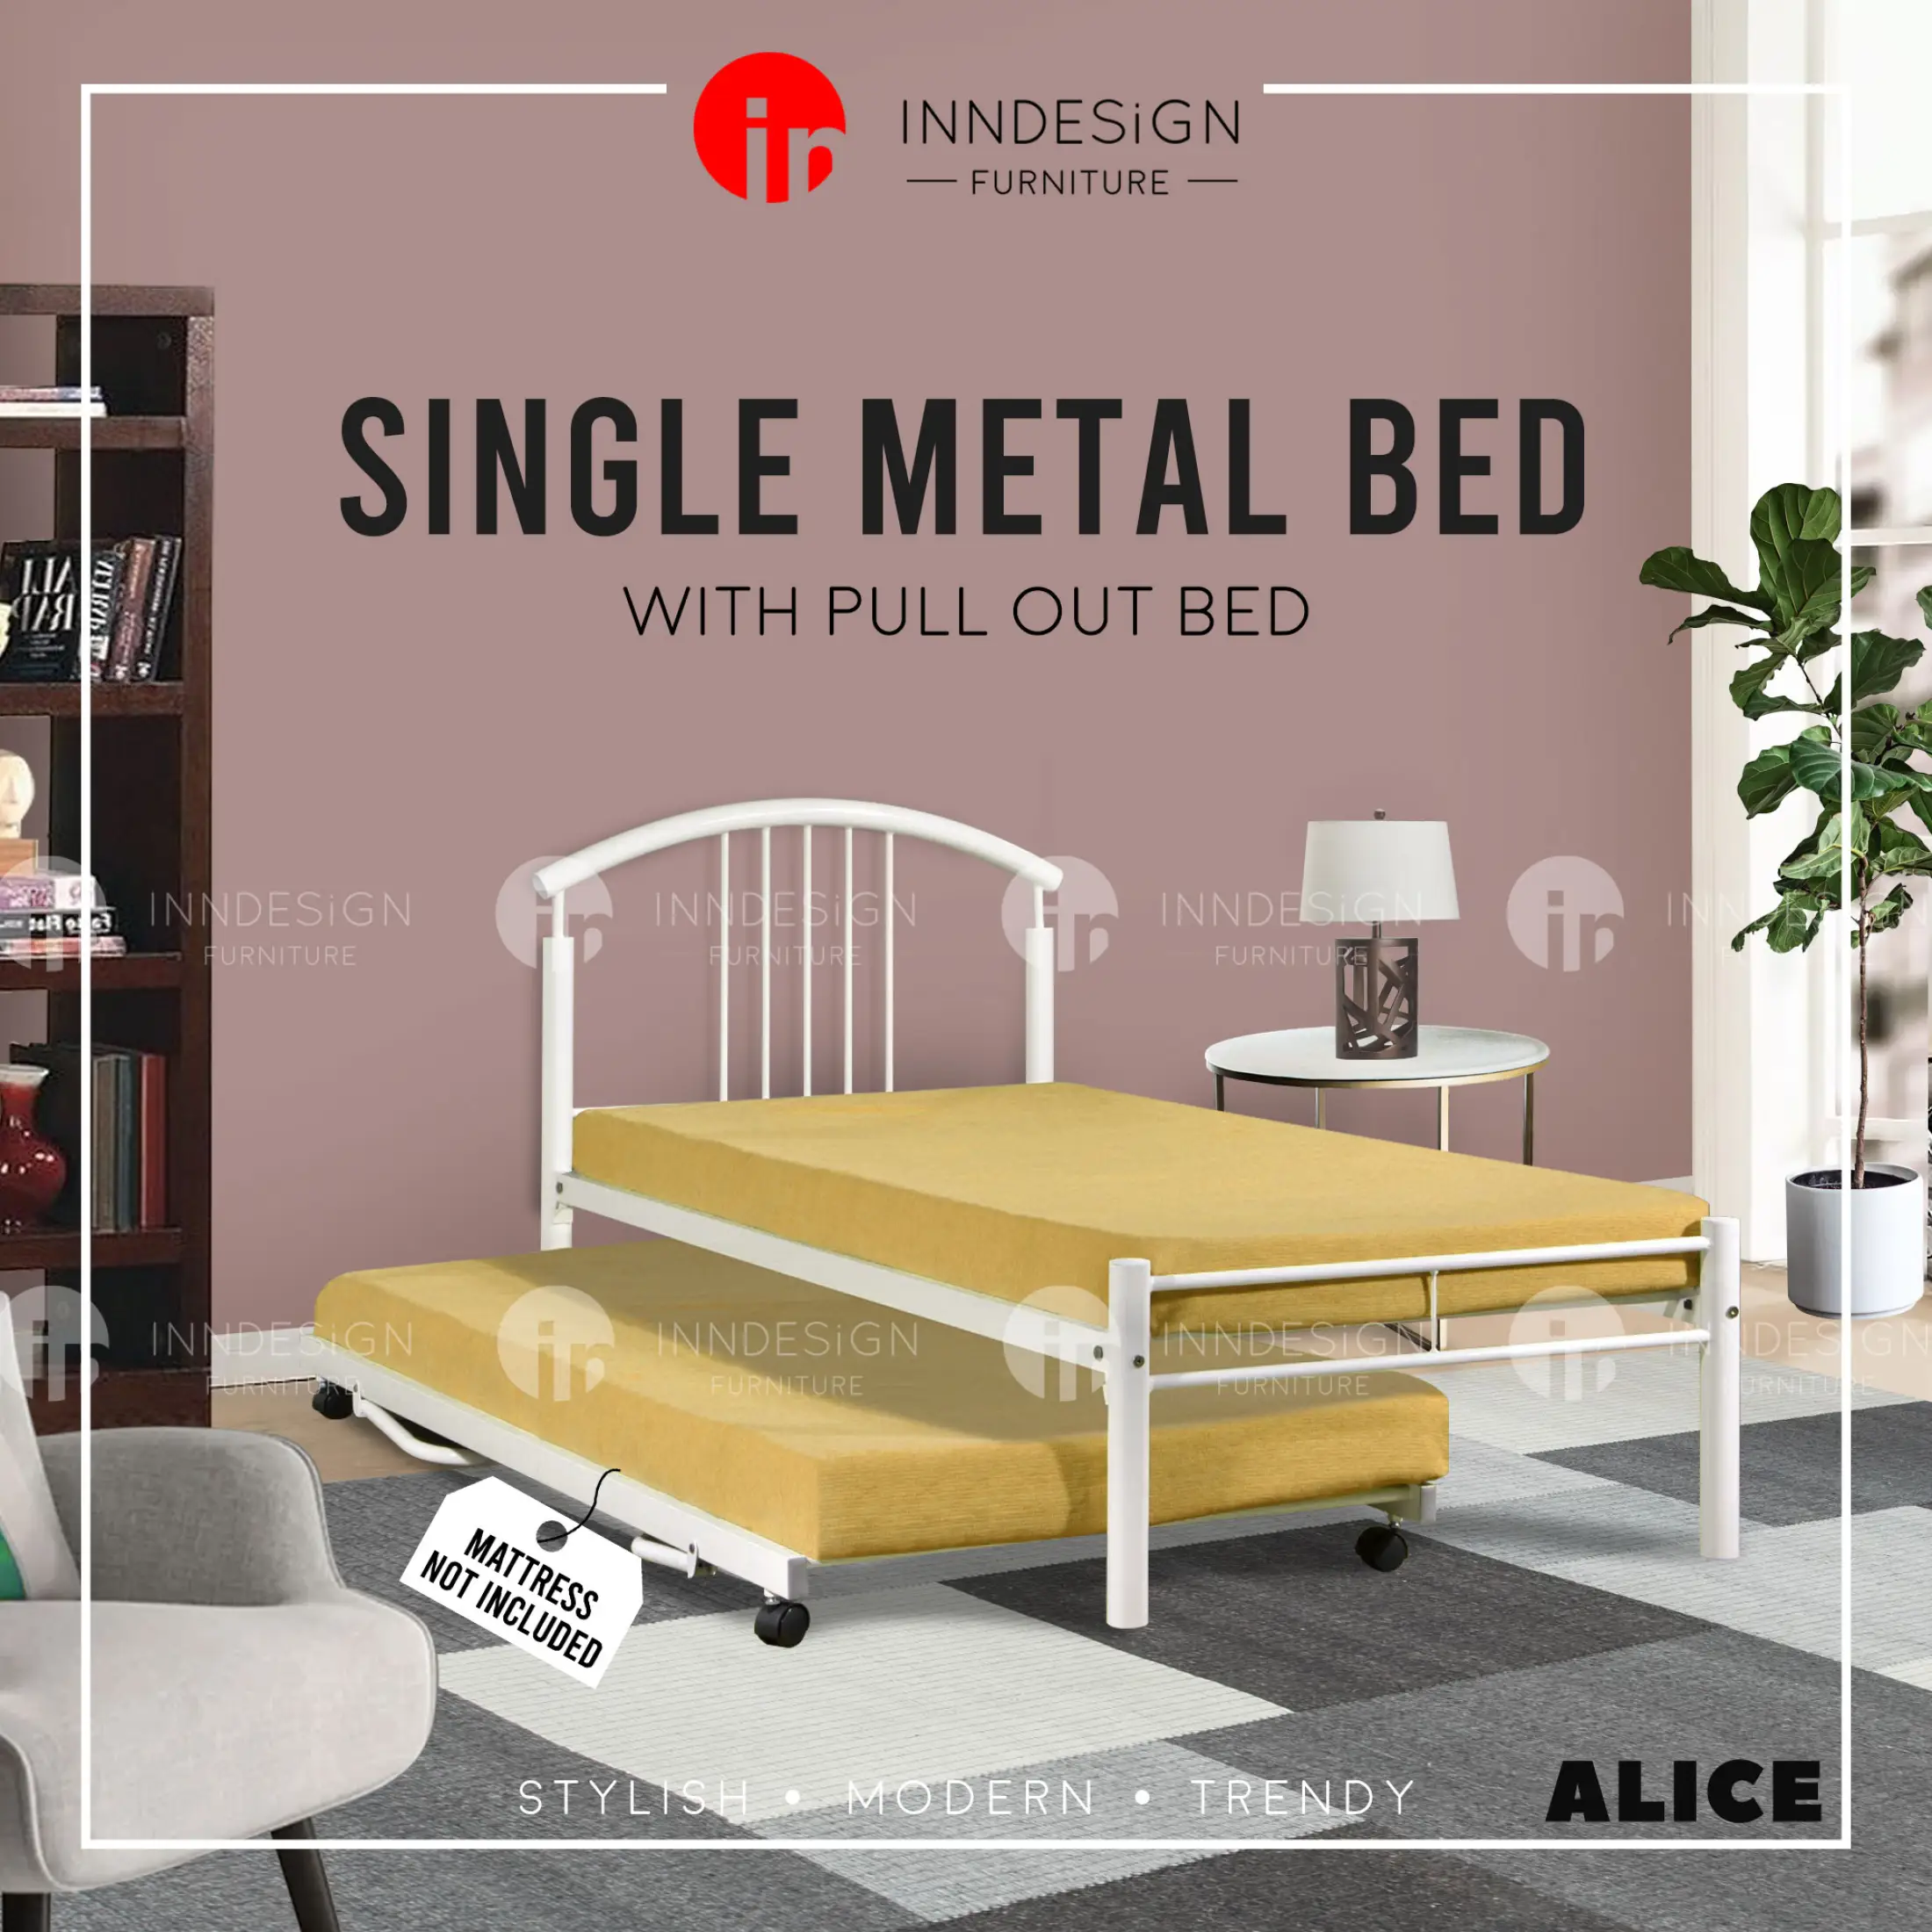 Bulky Alice Single Metal Bed Lift Up, Metal Bed Frame Lifts